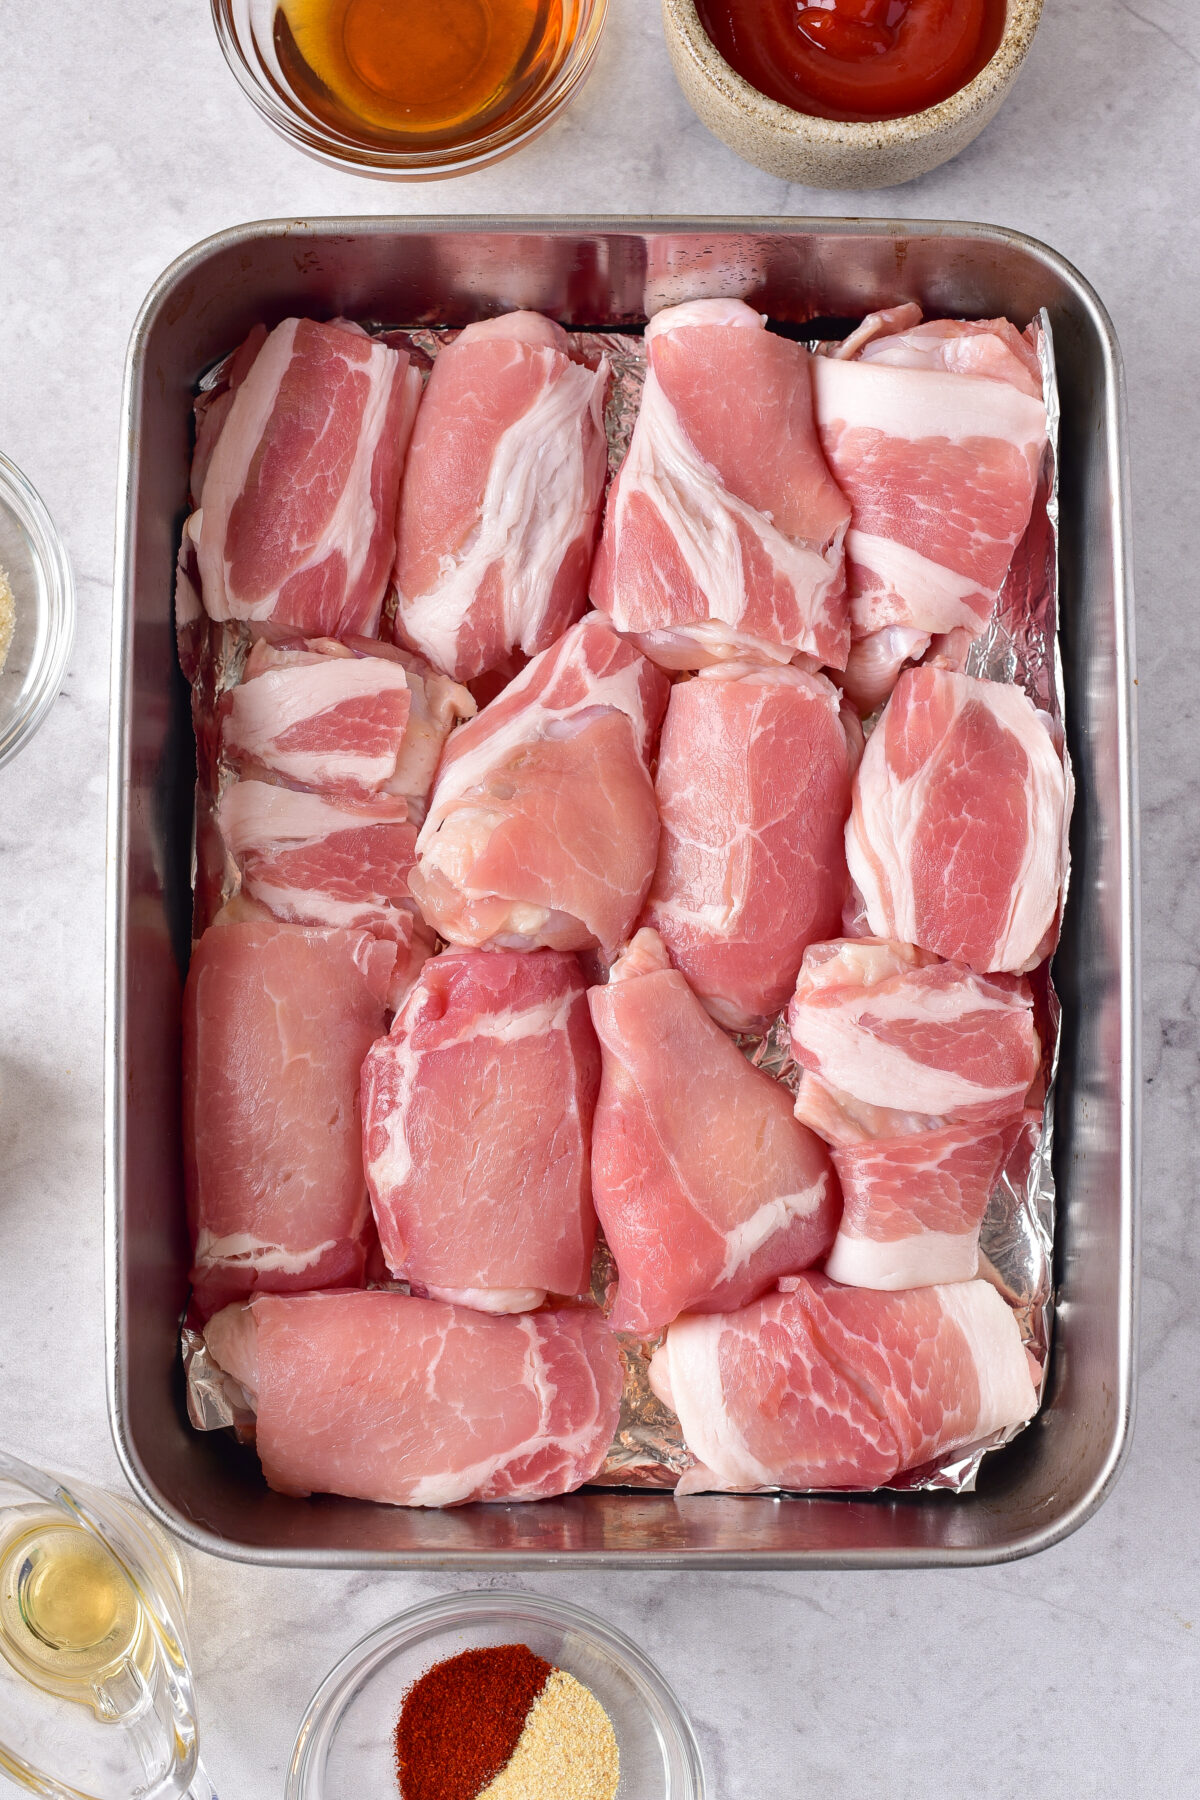 Wings wrapped in bacon and arranged in the baking dish.